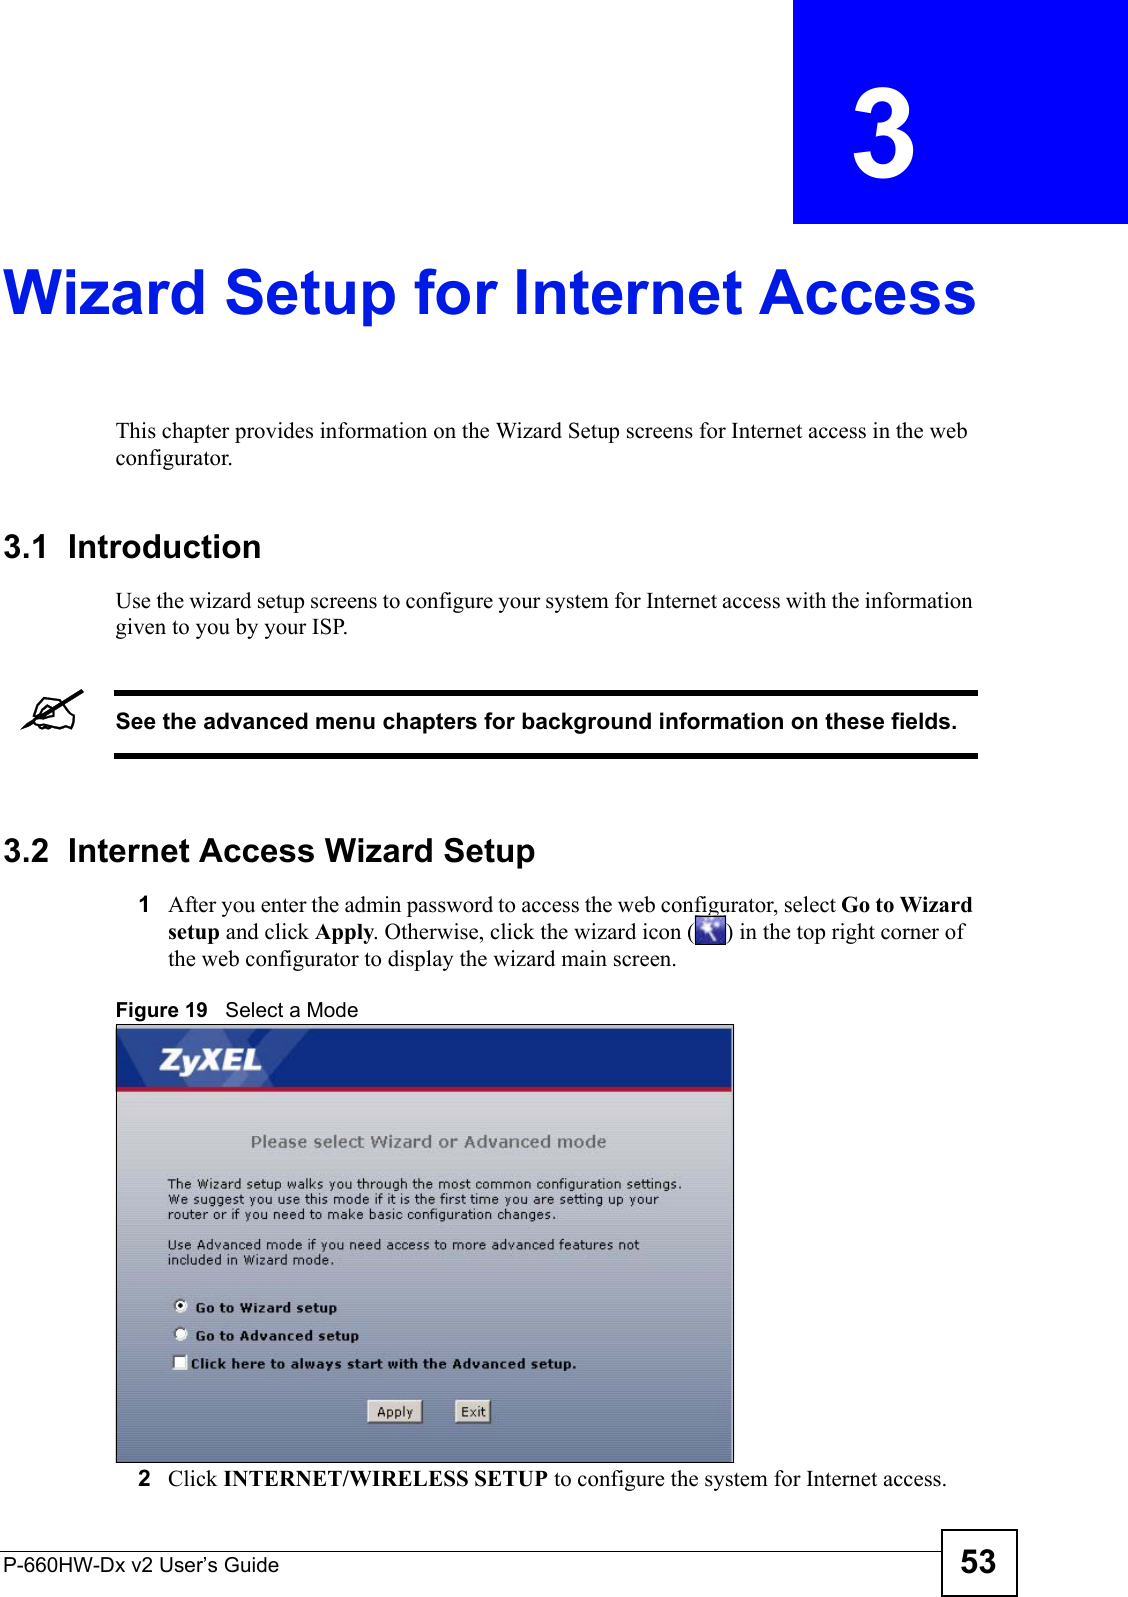 P-660HW-Dx v2 User’s Guide 53CHAPTER  3 Wizard Setup for Internet AccessThis chapter provides information on the Wizard Setup screens for Internet access in the web configurator.3.1  IntroductionUse the wizard setup screens to configure your system for Internet access with the information given to you by your ISP. &quot;See the advanced menu chapters for background information on these fields.3.2  Internet Access Wizard Setup1After you enter the admin password to access the web configurator, select Go to Wizard setup and click Apply. Otherwise, click the wizard icon ( ) in the top right corner of the web configurator to display the wizard main screen. Figure 19   Select a Mode2Click INTERNET/WIRELESS SETUP to configure the system for Internet access.